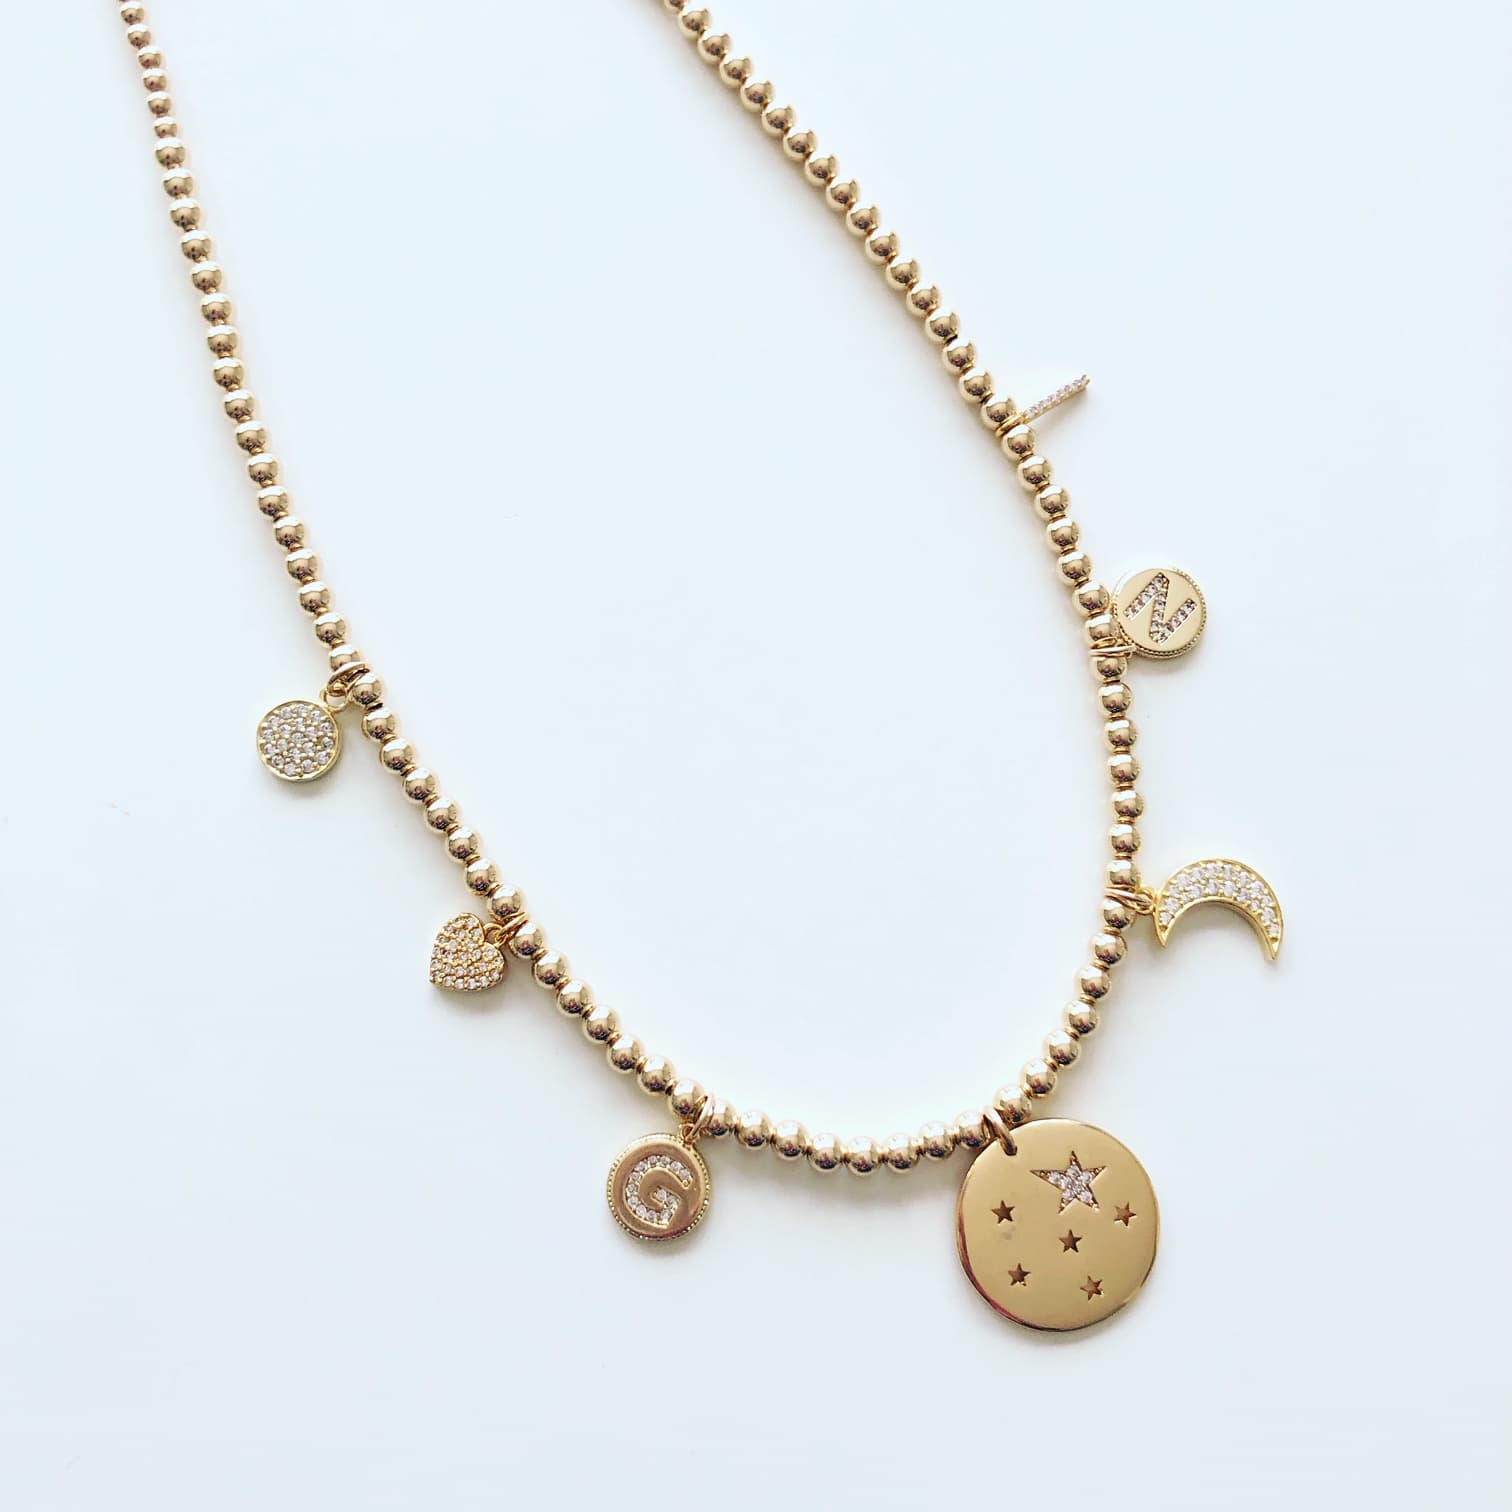 The SJD Charm Necklace